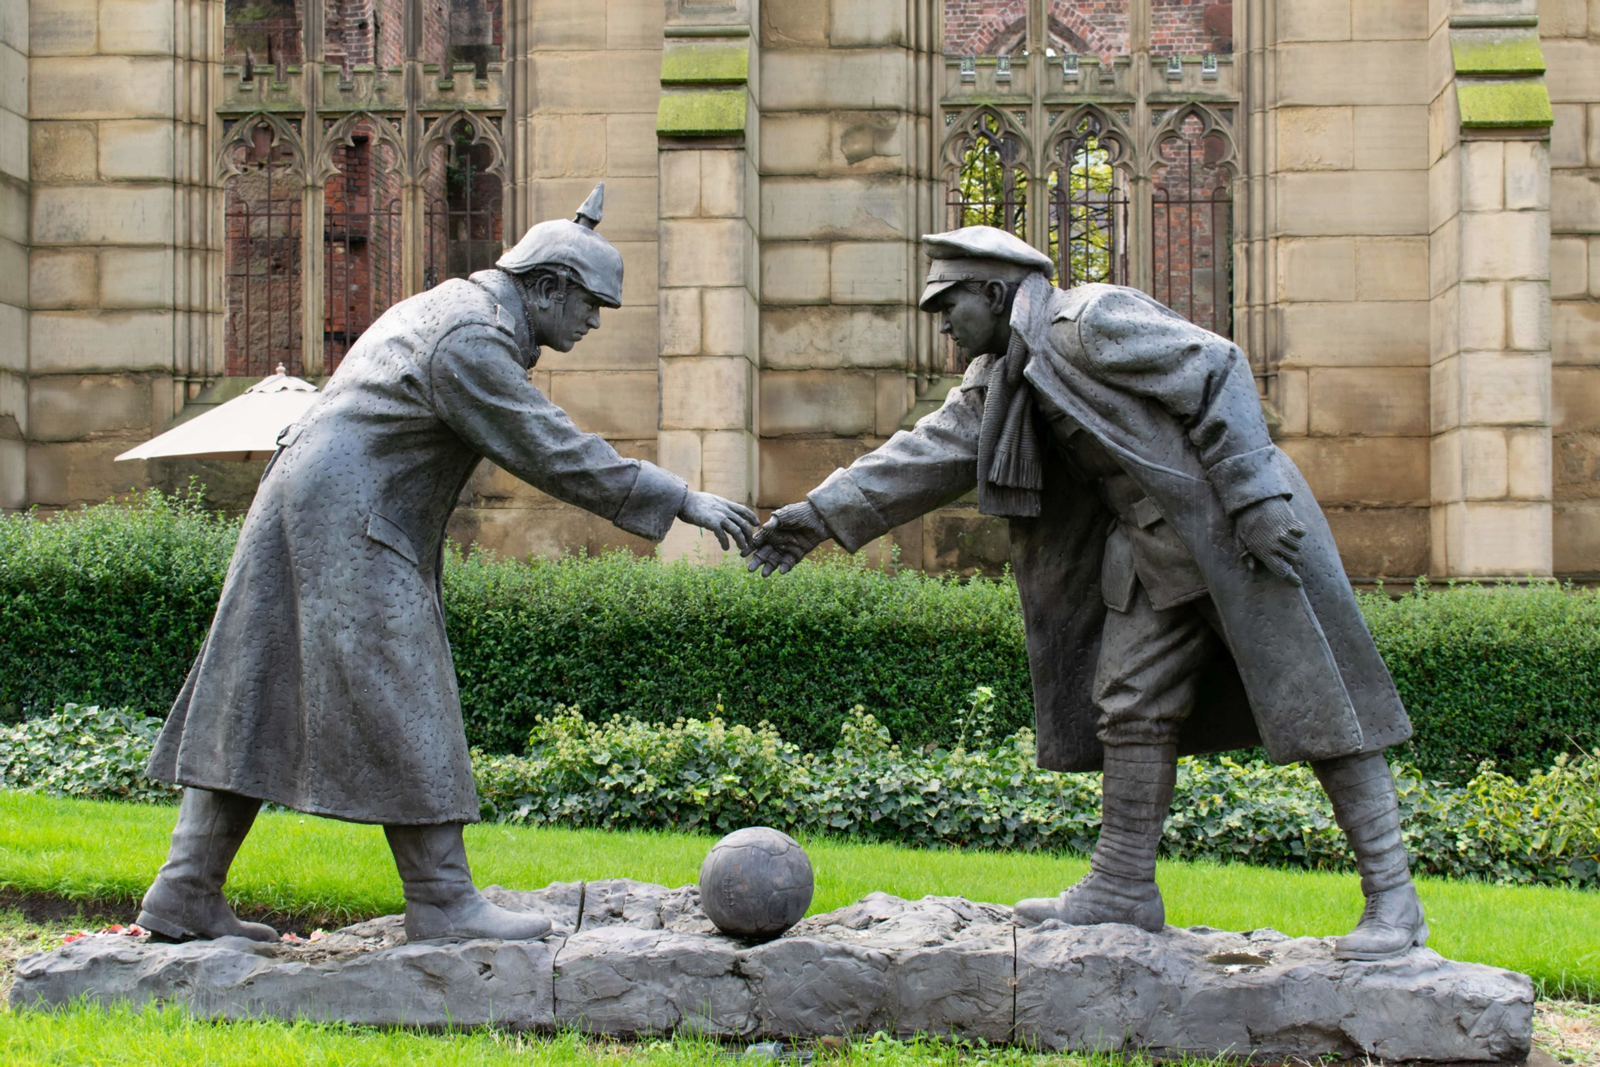 A bronze war memorial shows two soldiers shaking hands over a football on the ground.